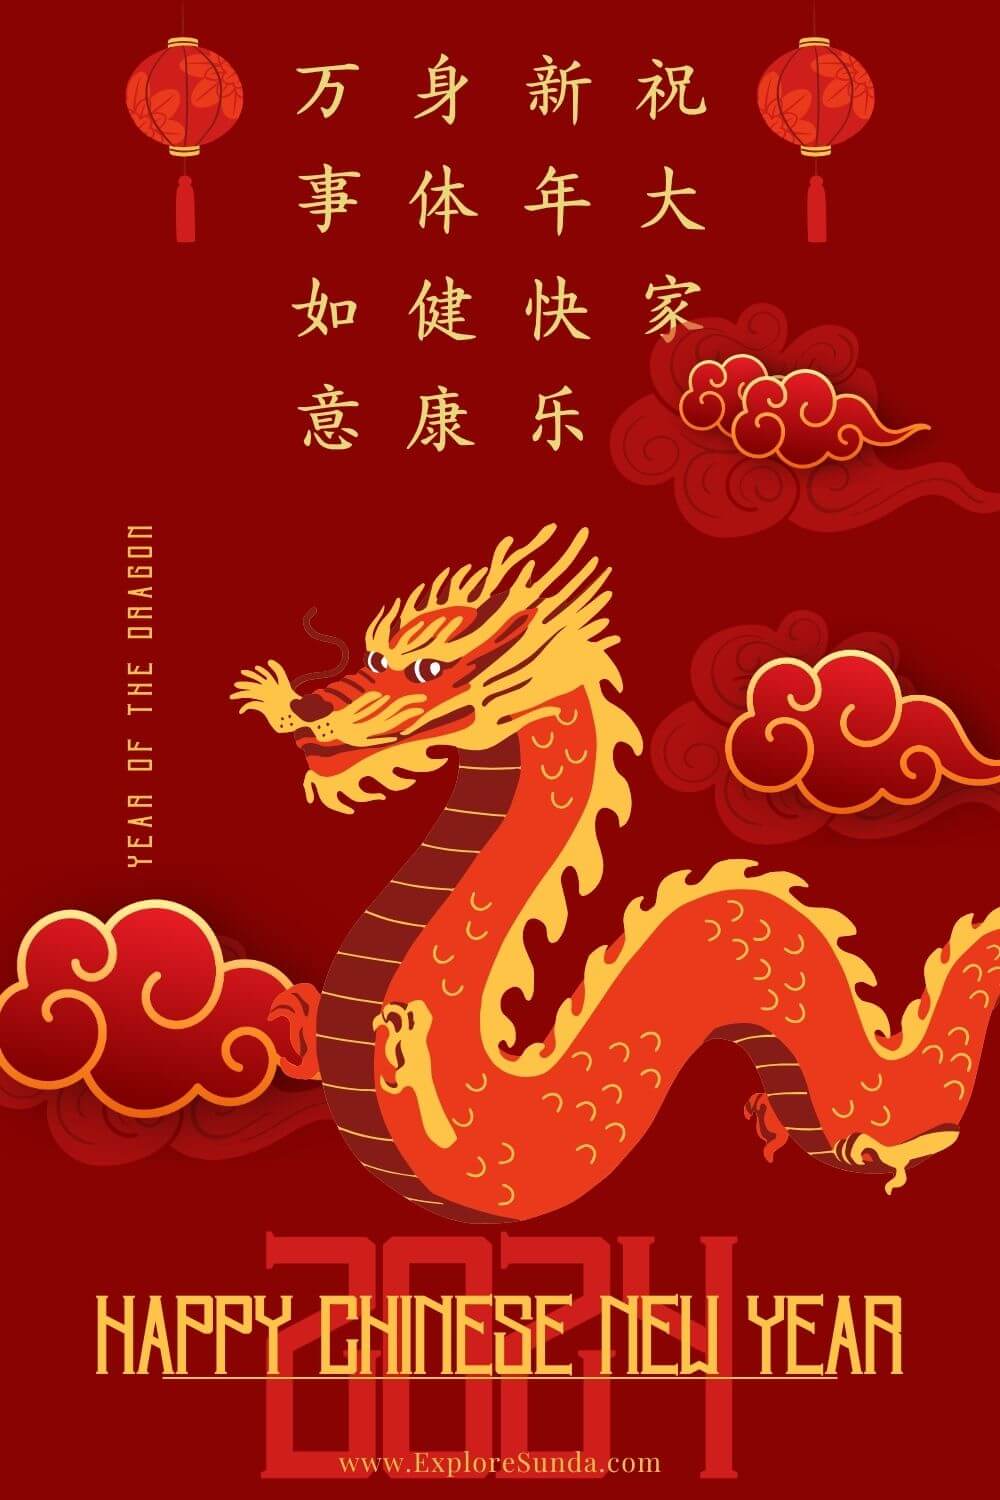 Lunar New Year: The Insider's Guide